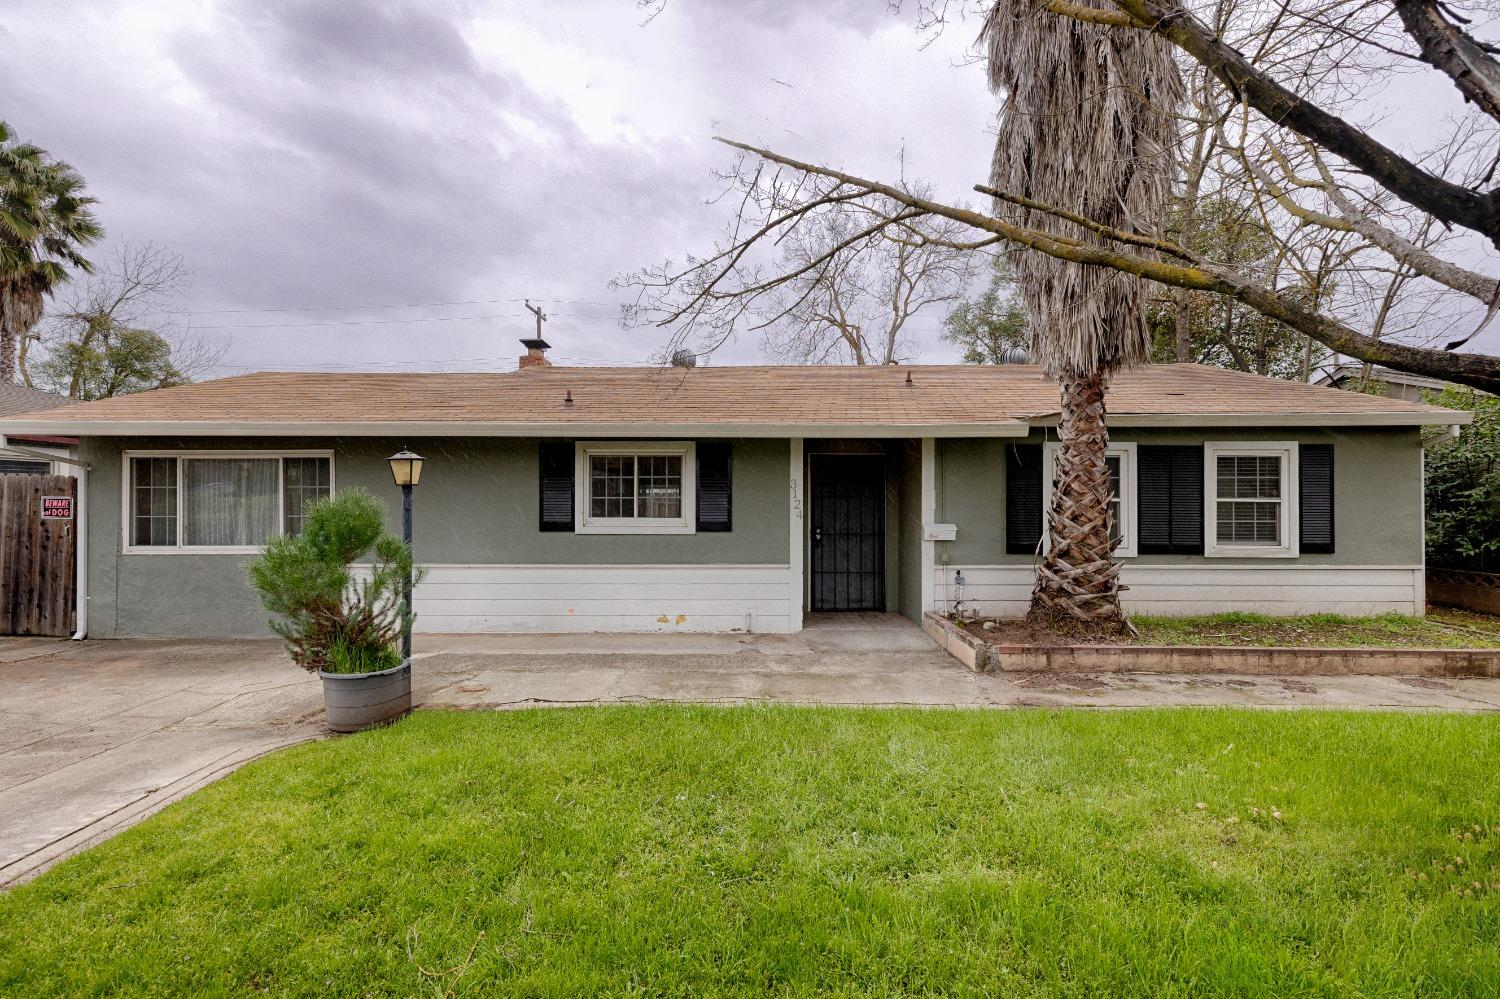 Come see this ADORABLE, open-concept home in the heart of Sacramento! This 3-bedroom, 1-bathrom home